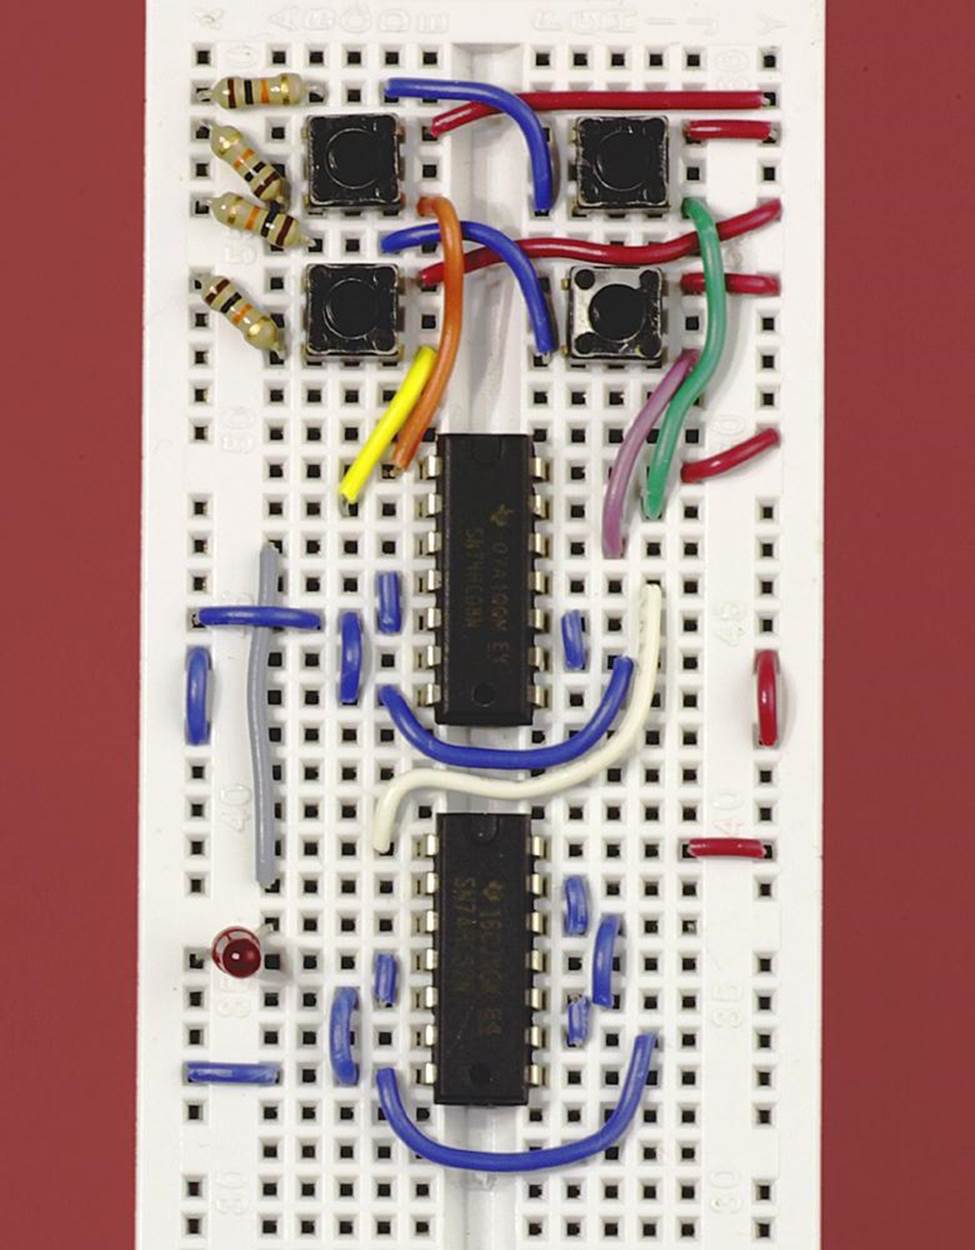 The simplest and most basic demonstration version of the Telepathy Tester. Pushbuttons for the participants are included as four tactile switches at the top. The LED at lower left is the only output.Telepathy Testbasic demo version